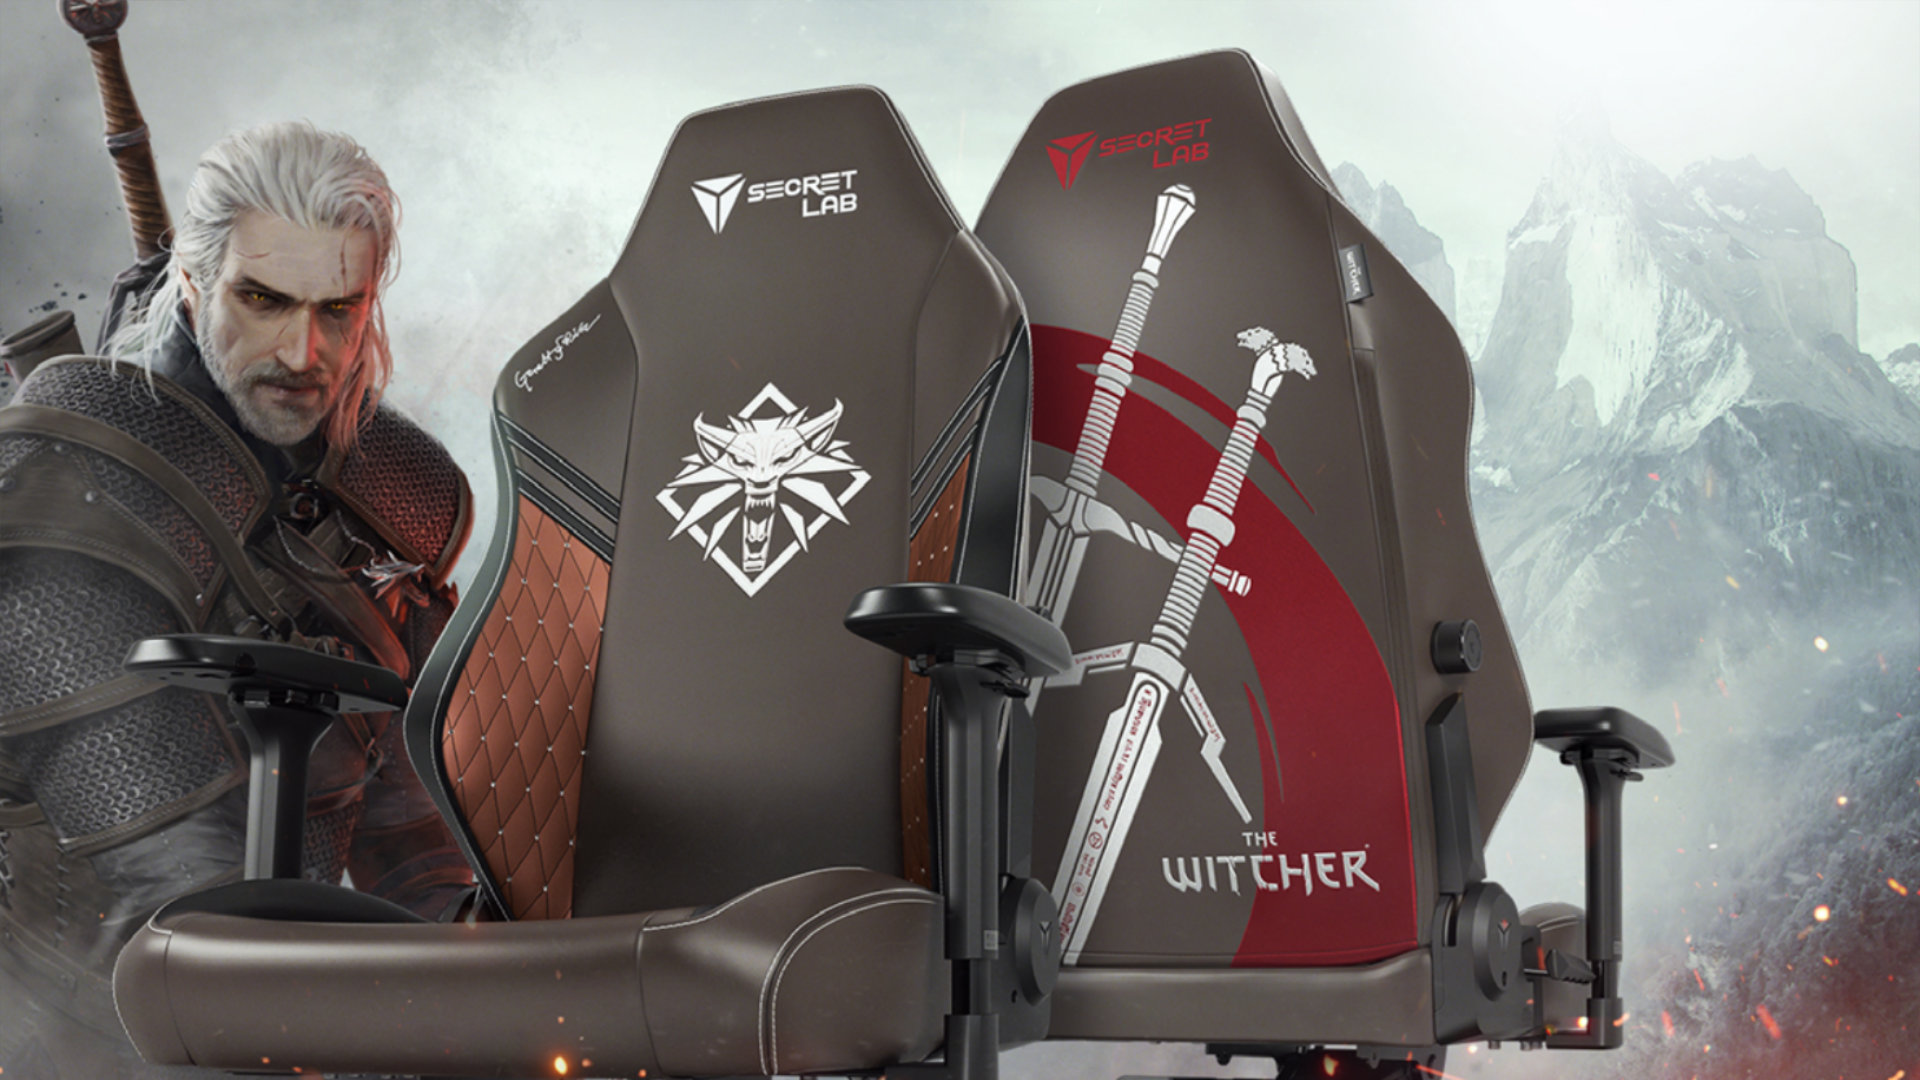 Secretlab unleashes The Witcher gaming chair to celebrate Netflix’s second season